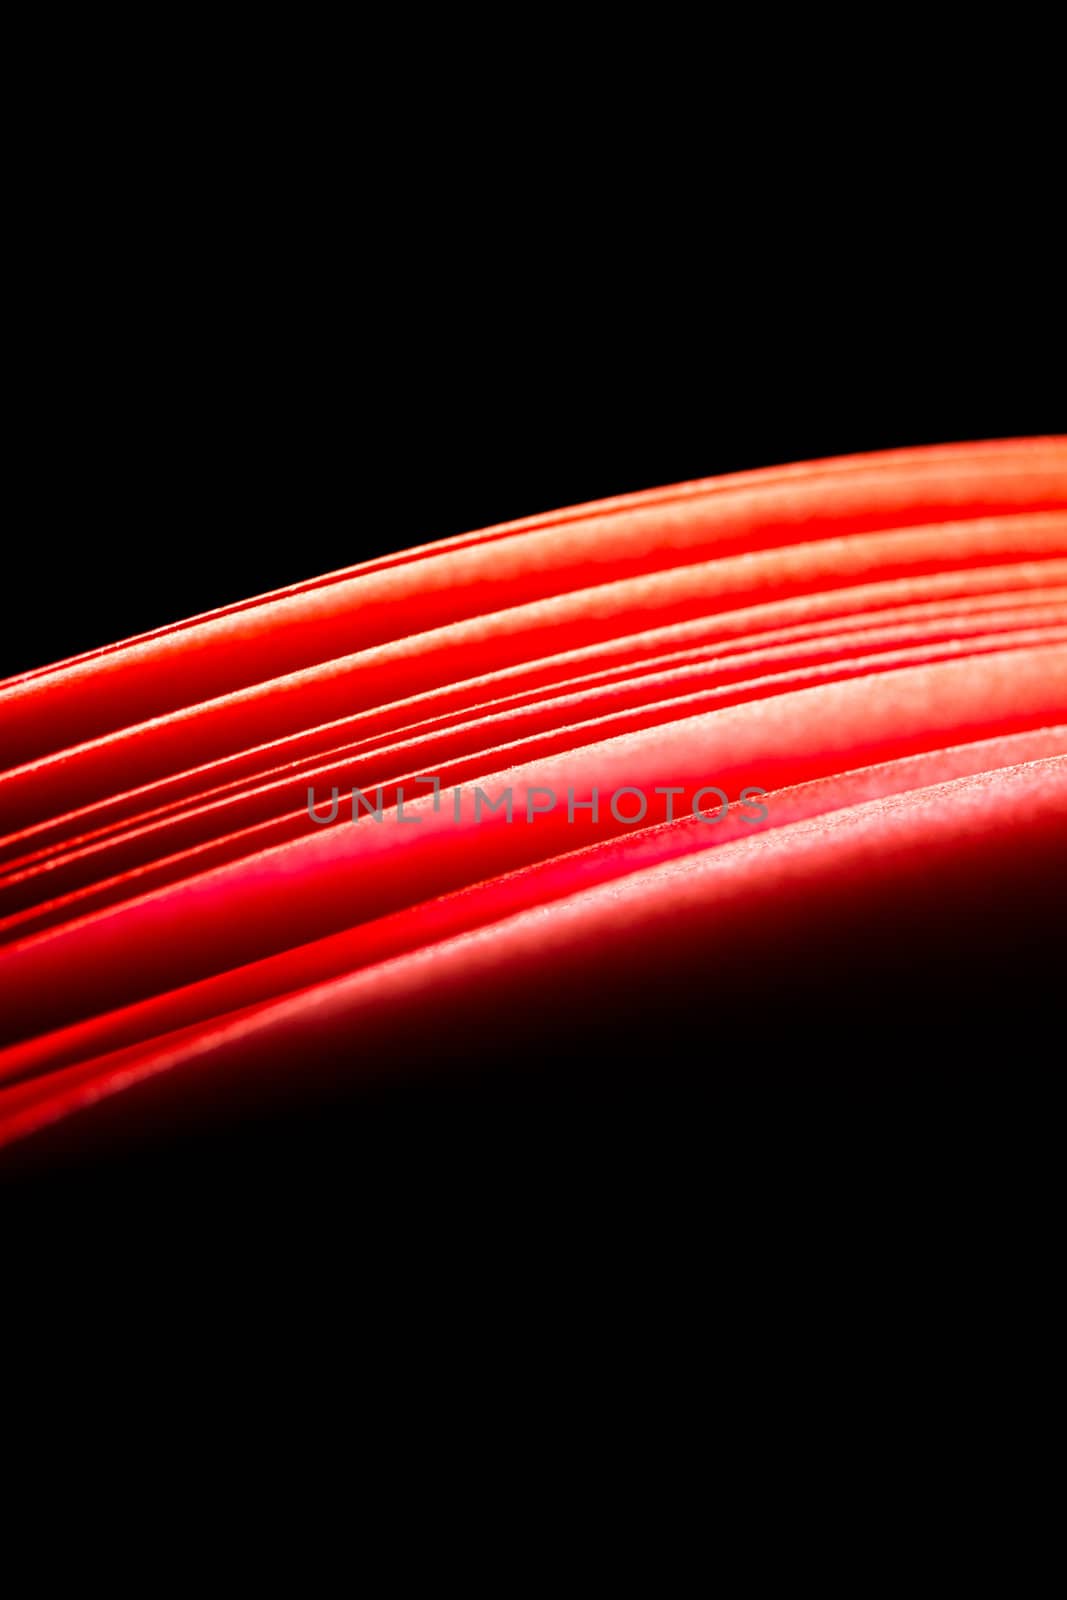 red A4 paper illuminated with lights with black background forming a fiery red curve